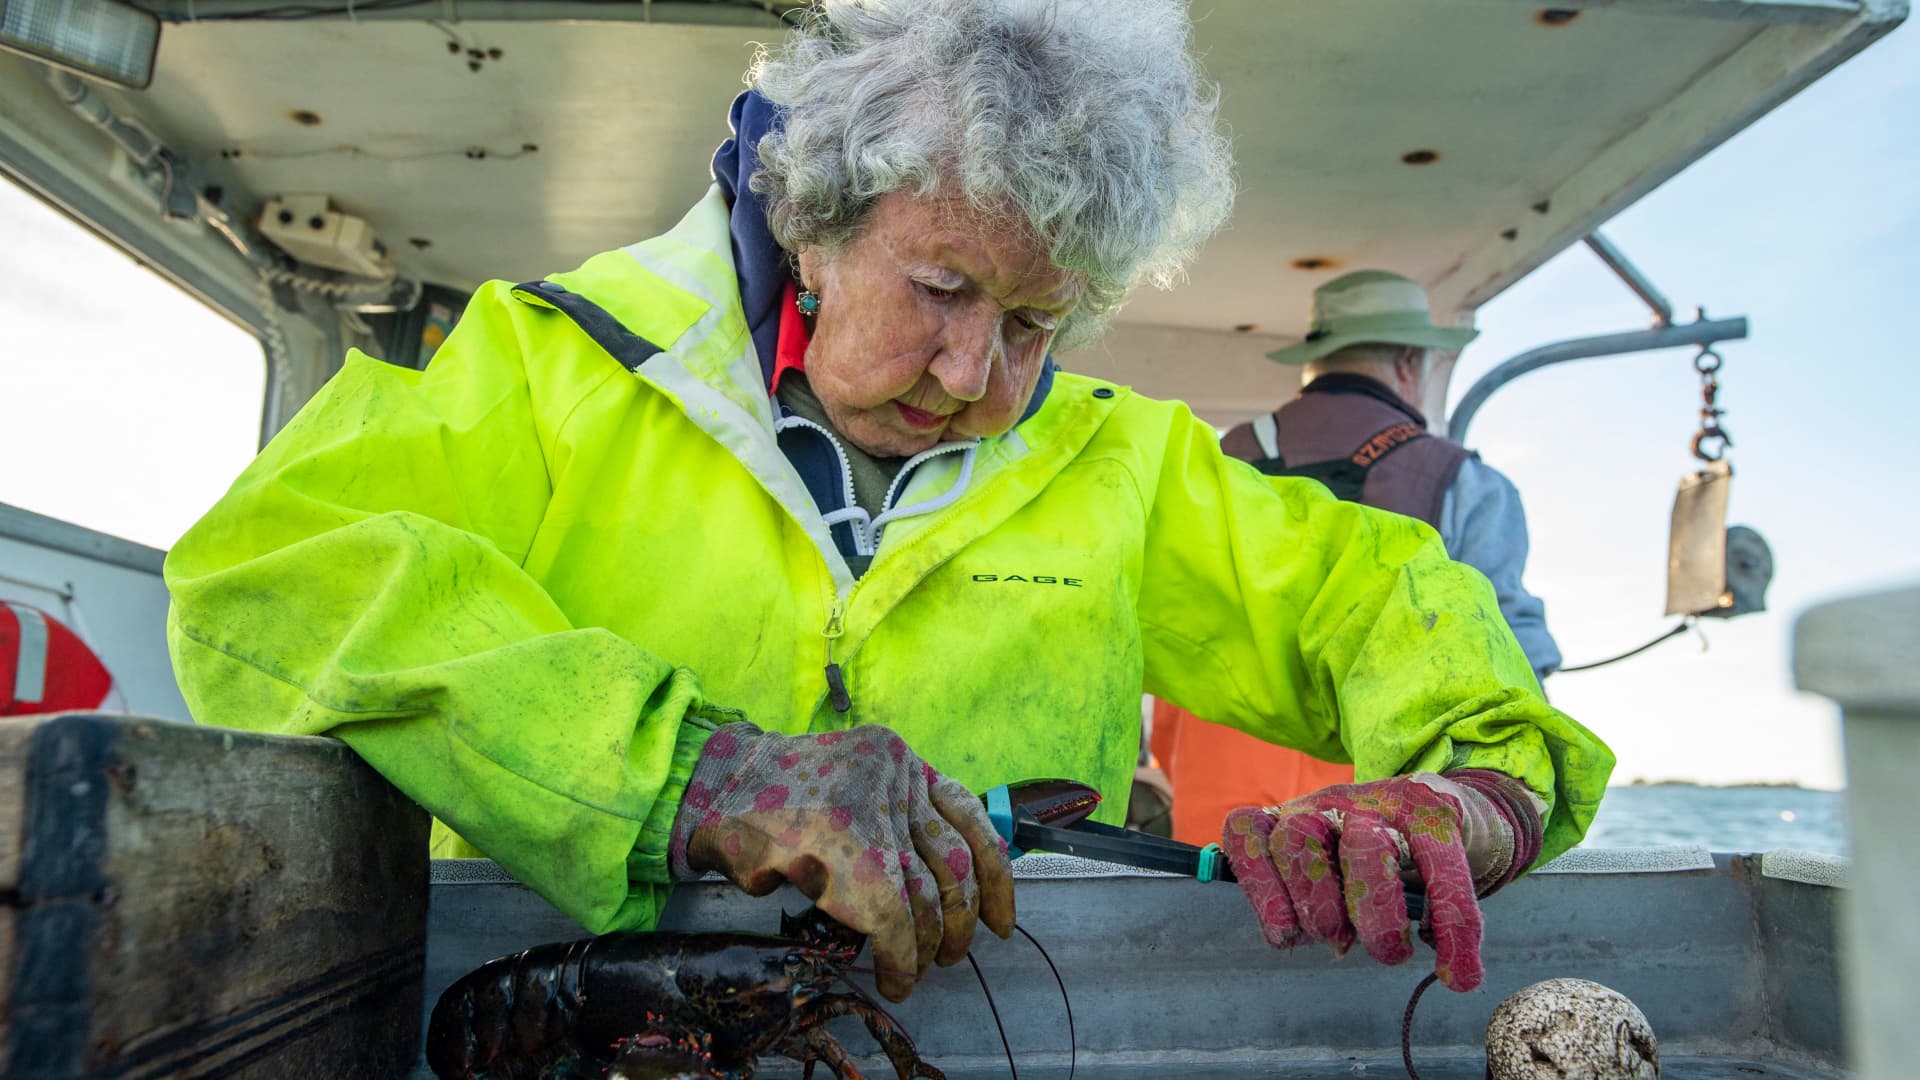 104-year-old has been catching lobsters for more than 90 years